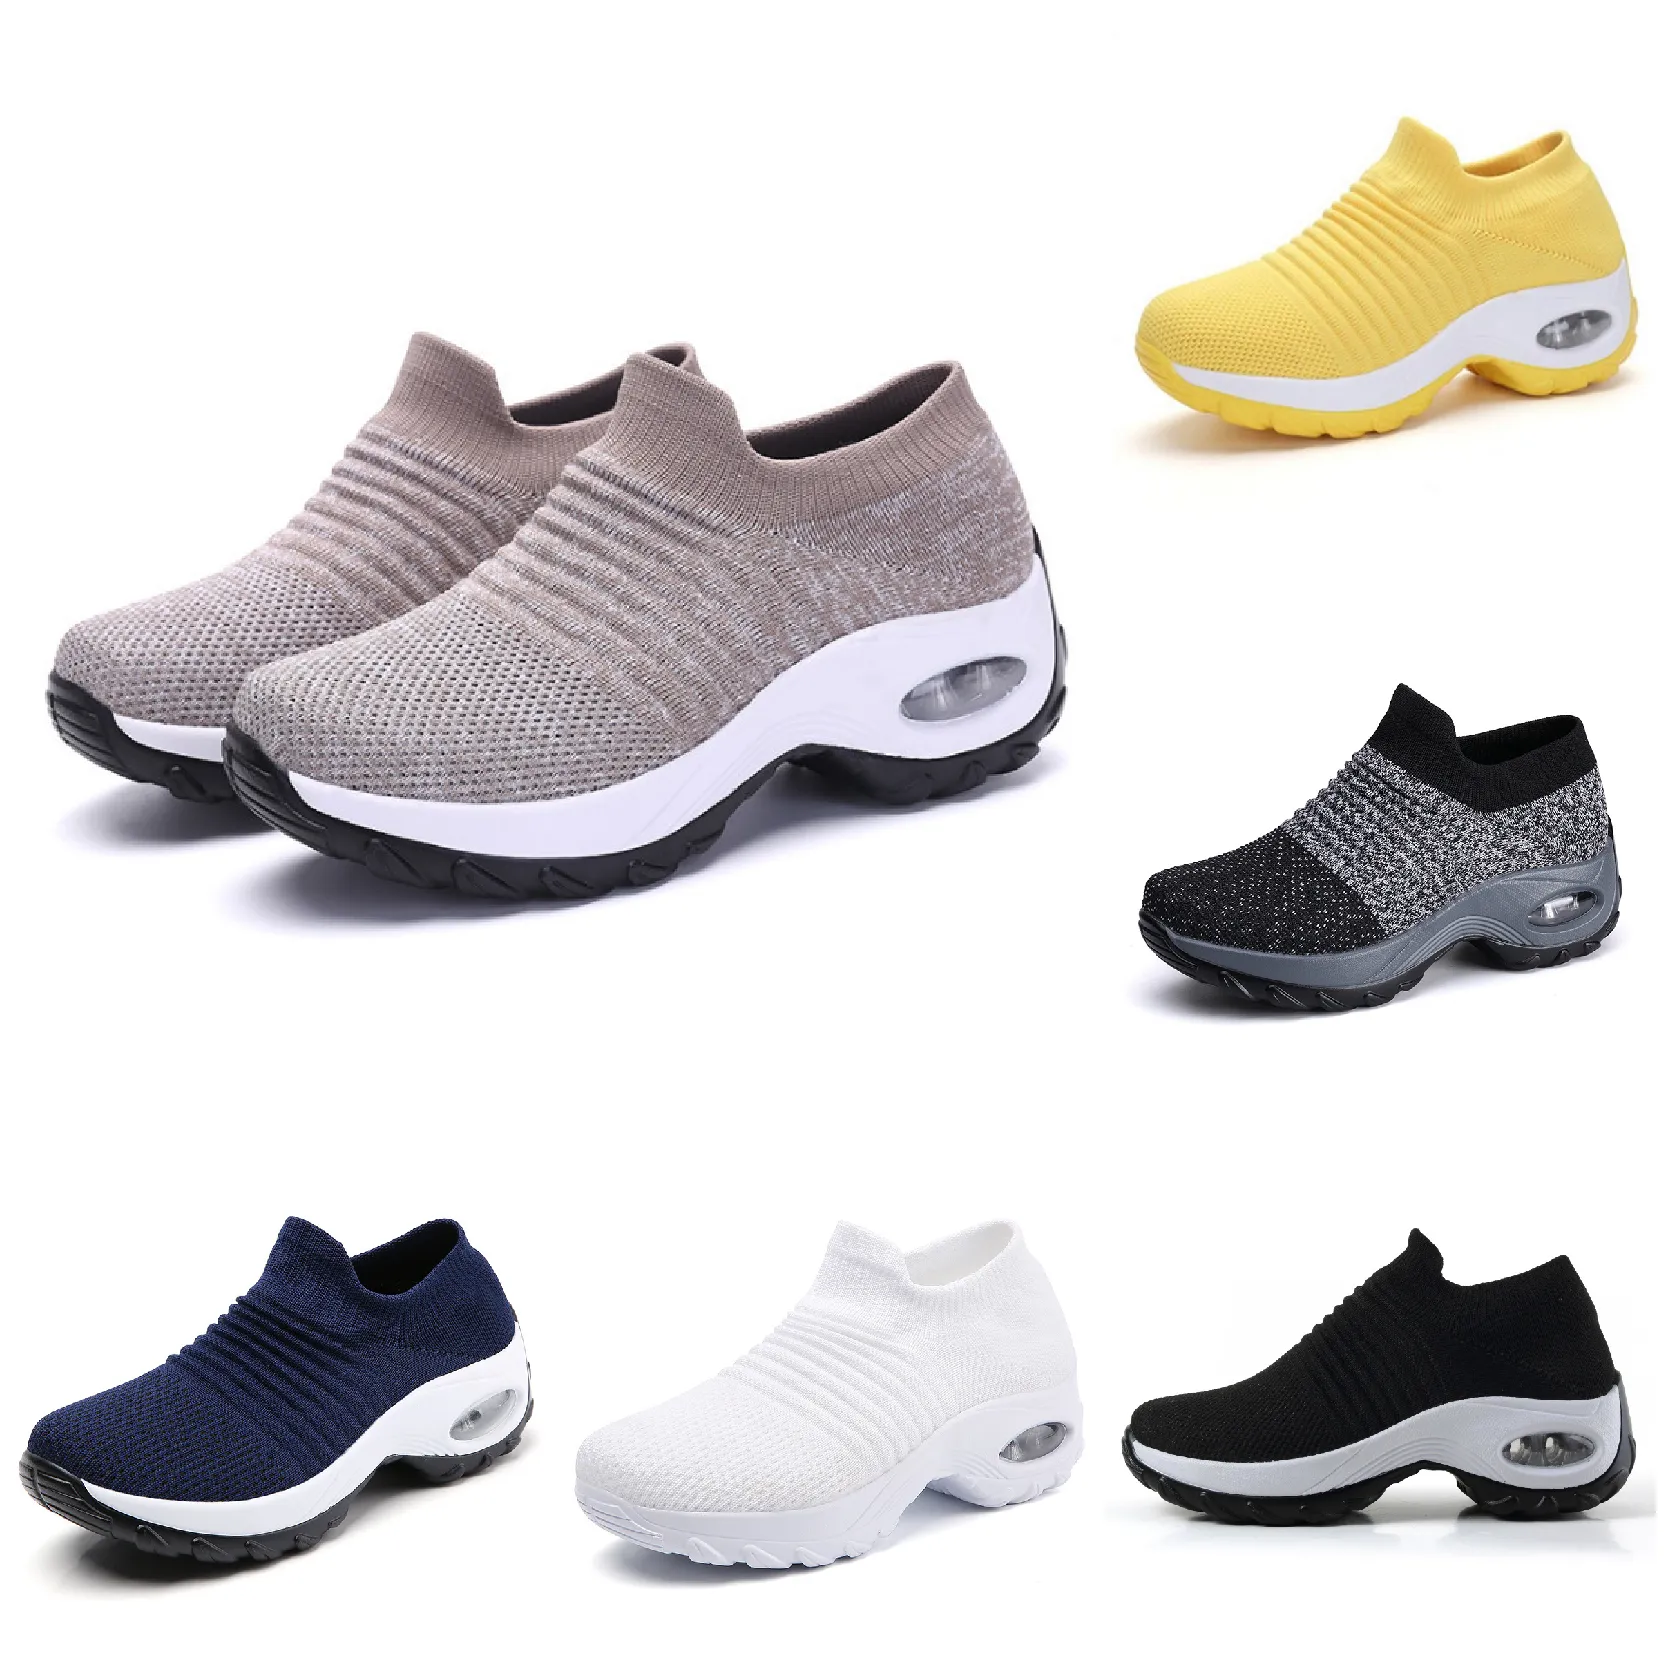 GAI Sports and leisure high elasticity breathable shoes, trendy and fashionable lightweight socks and shoes 50